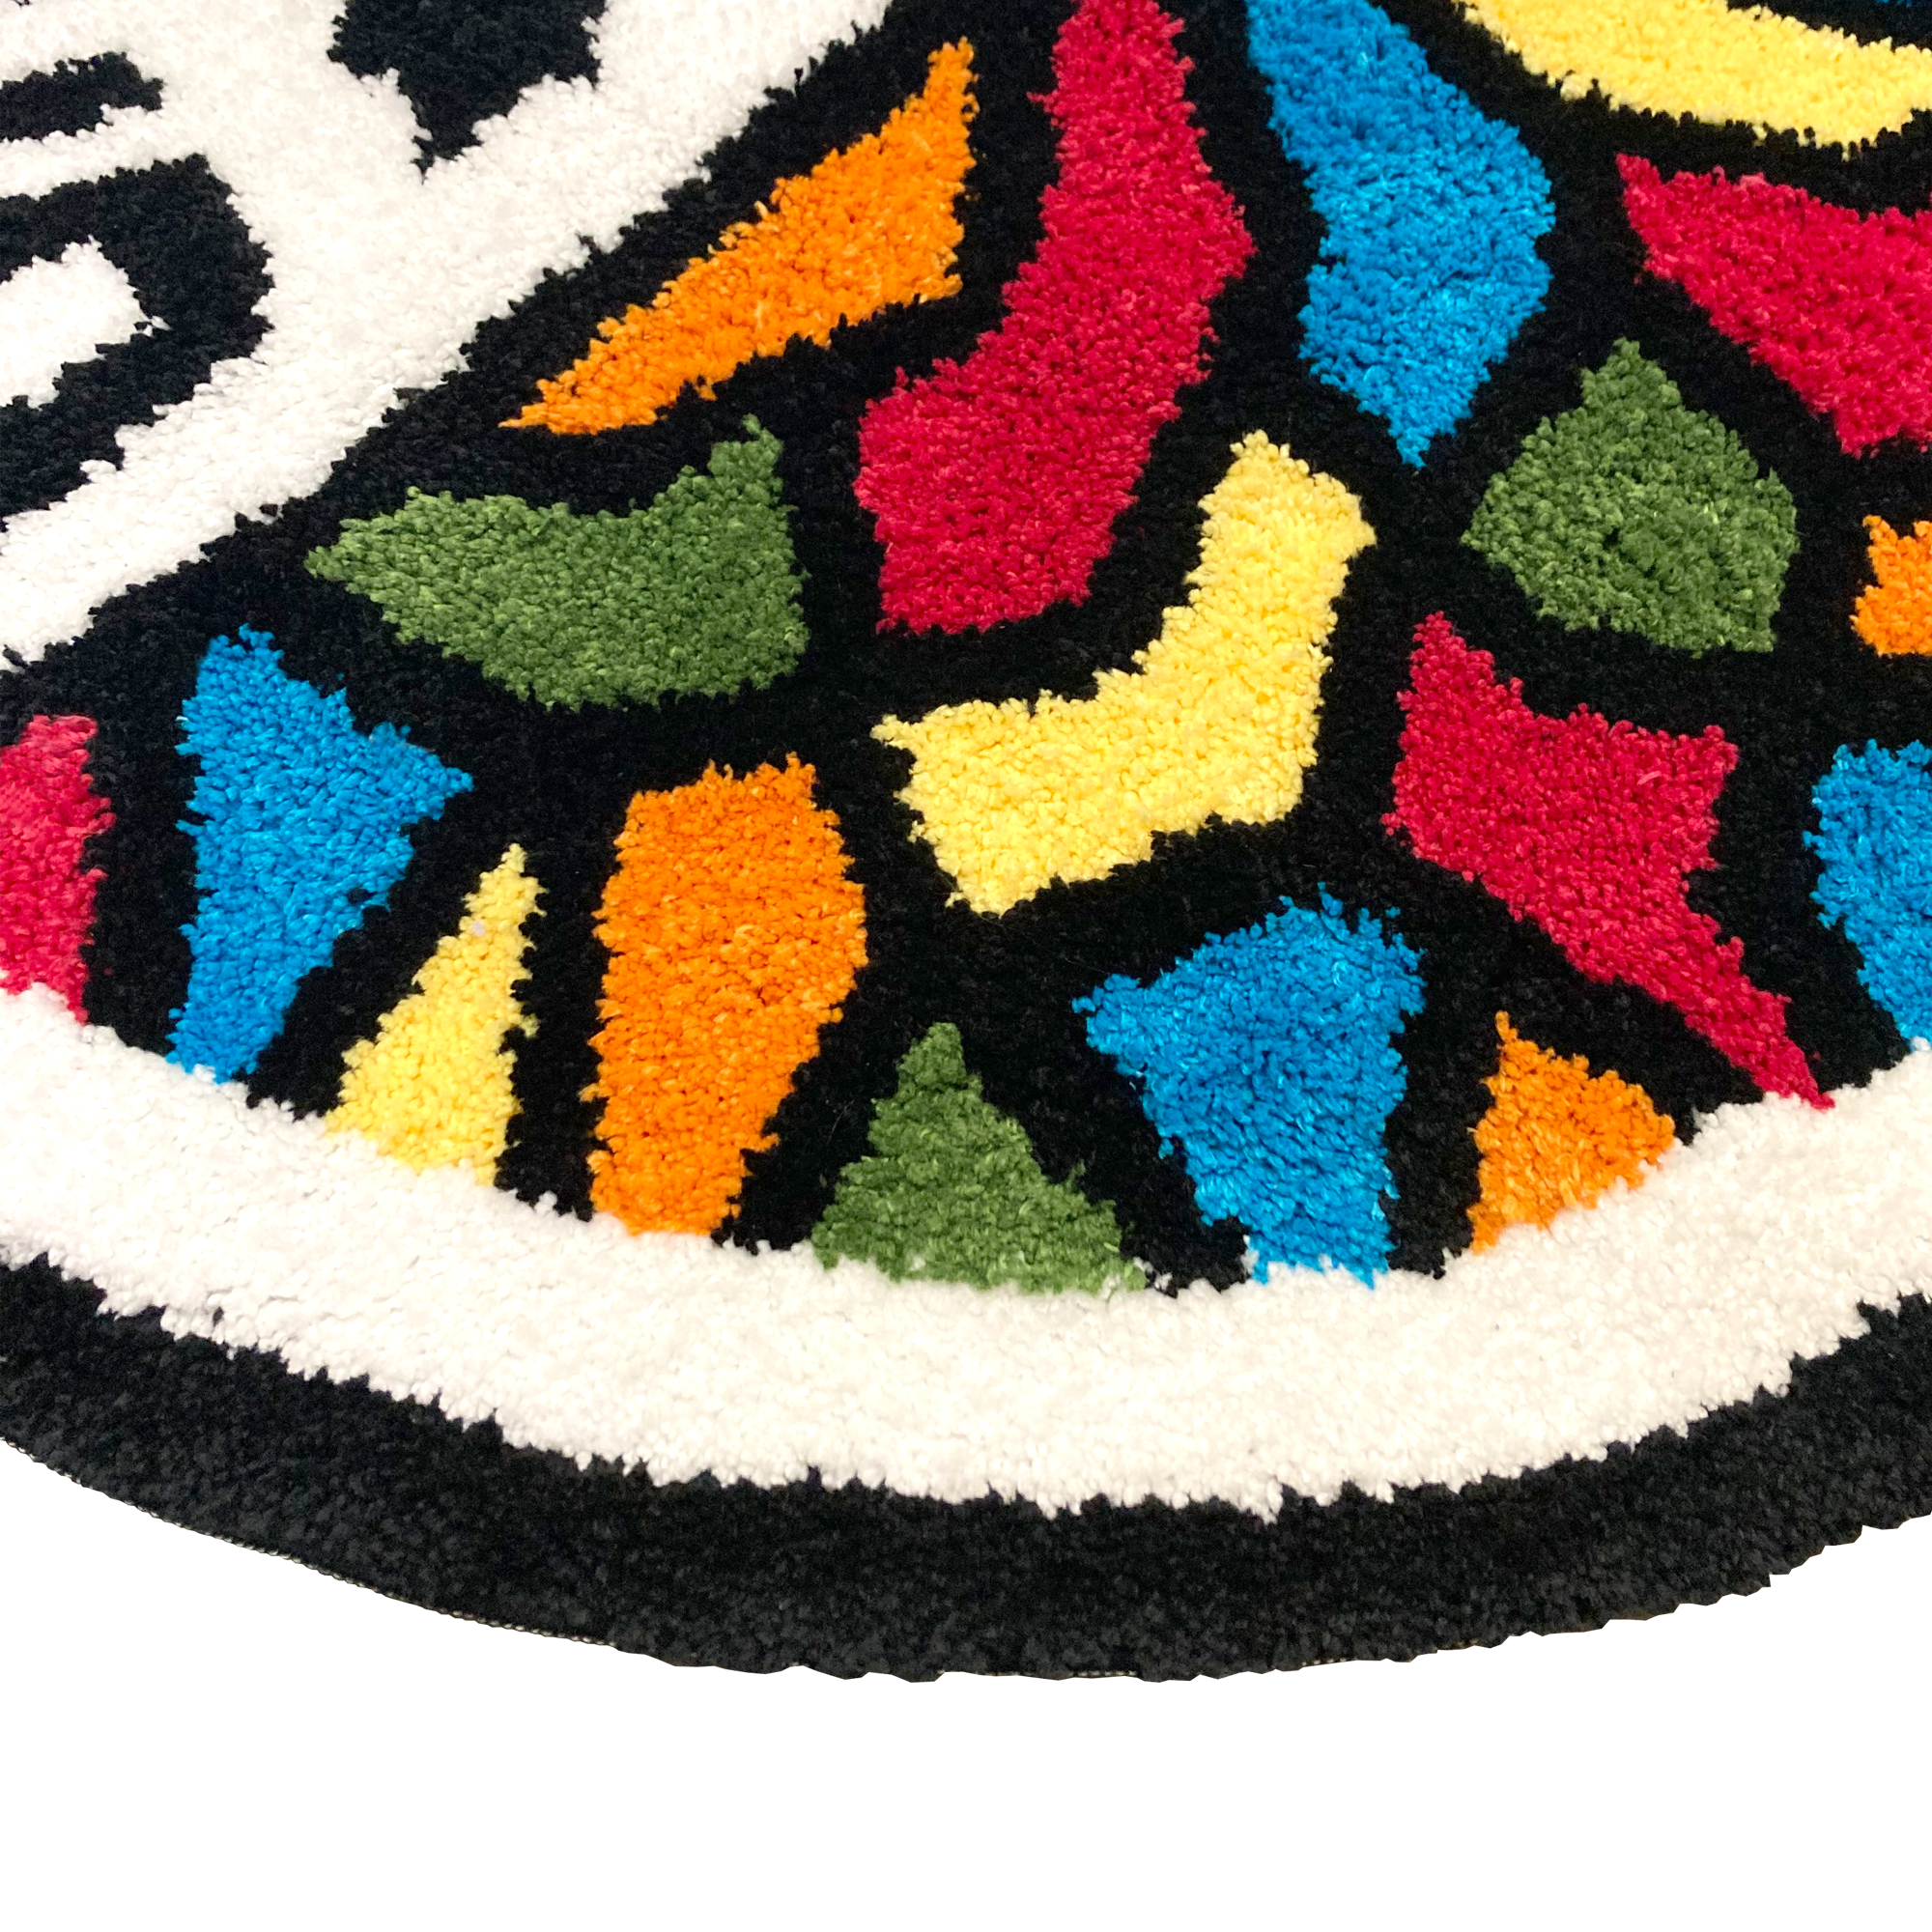 Detailed close up image of round area rug with Oakland Roots SC crest in full color.